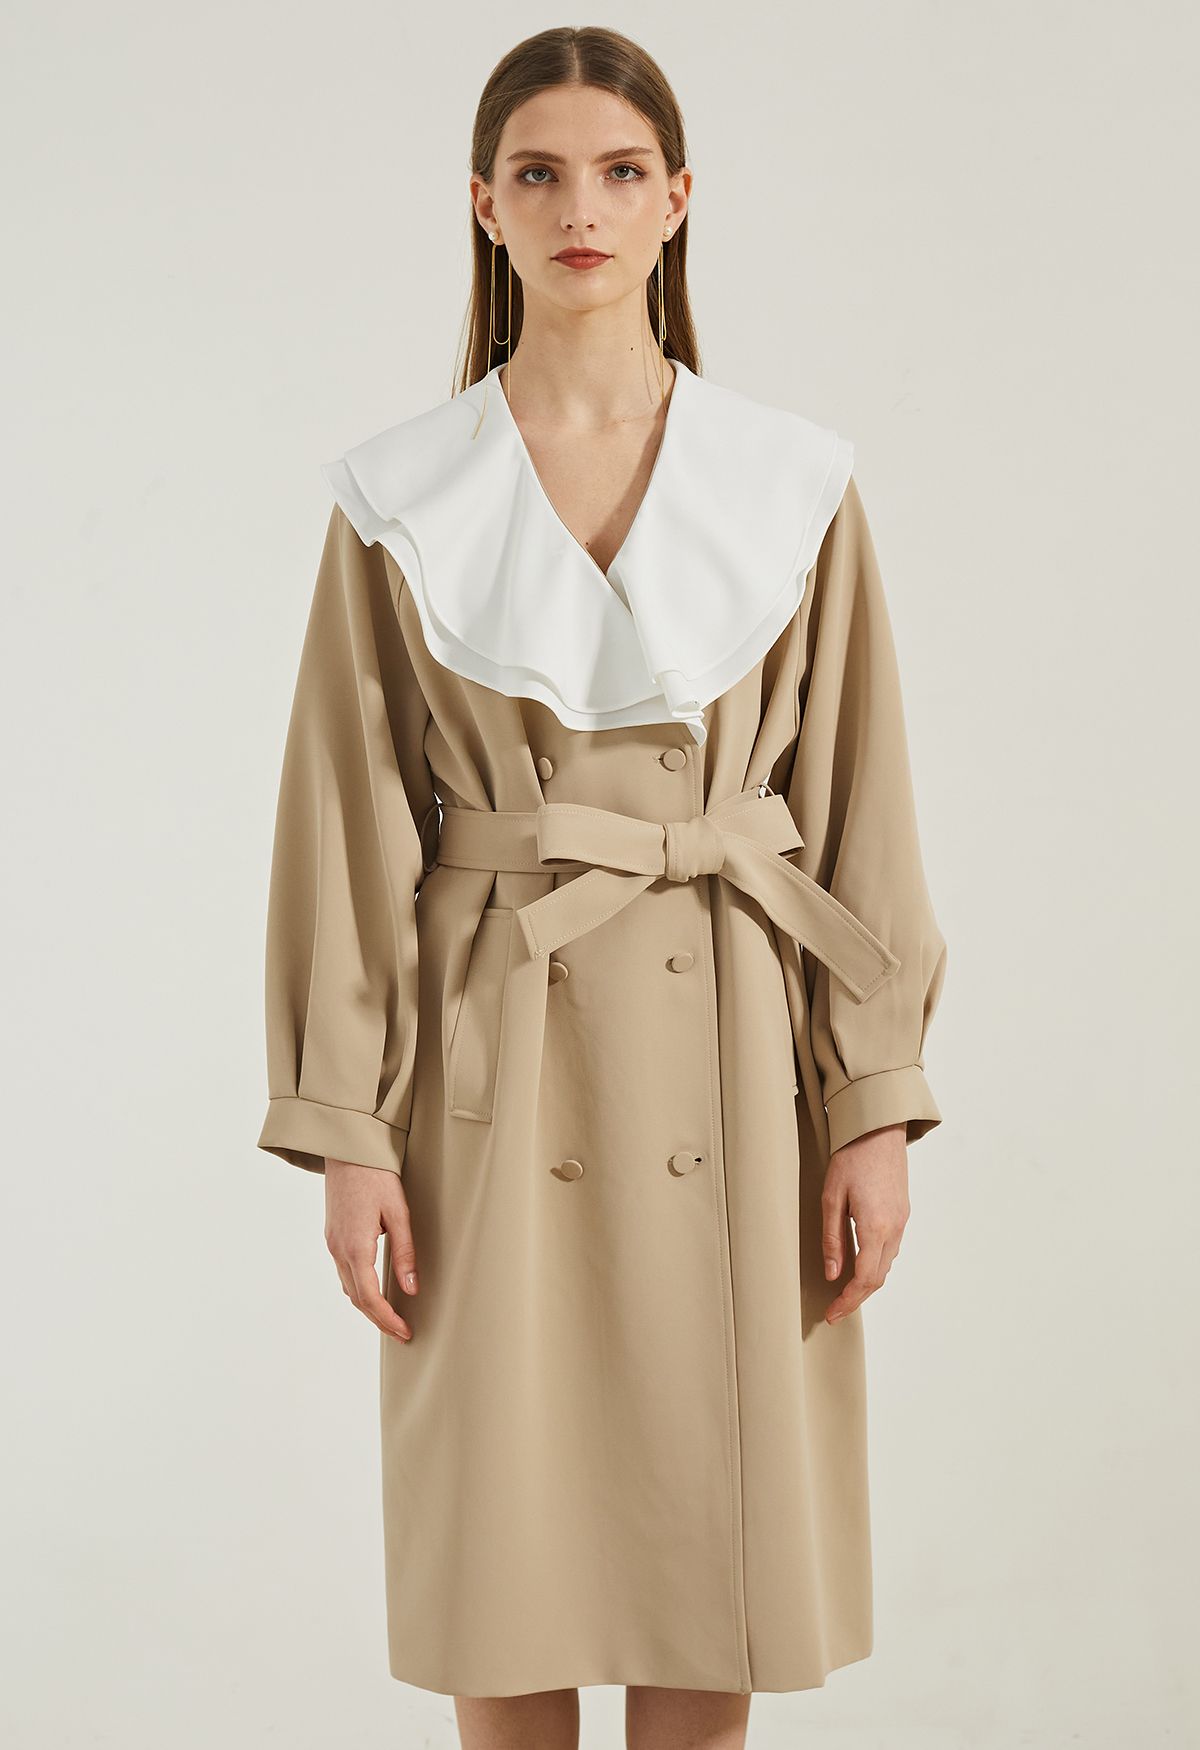 Ruffle Neck Double-Breasted Trench Dress in Light Tan